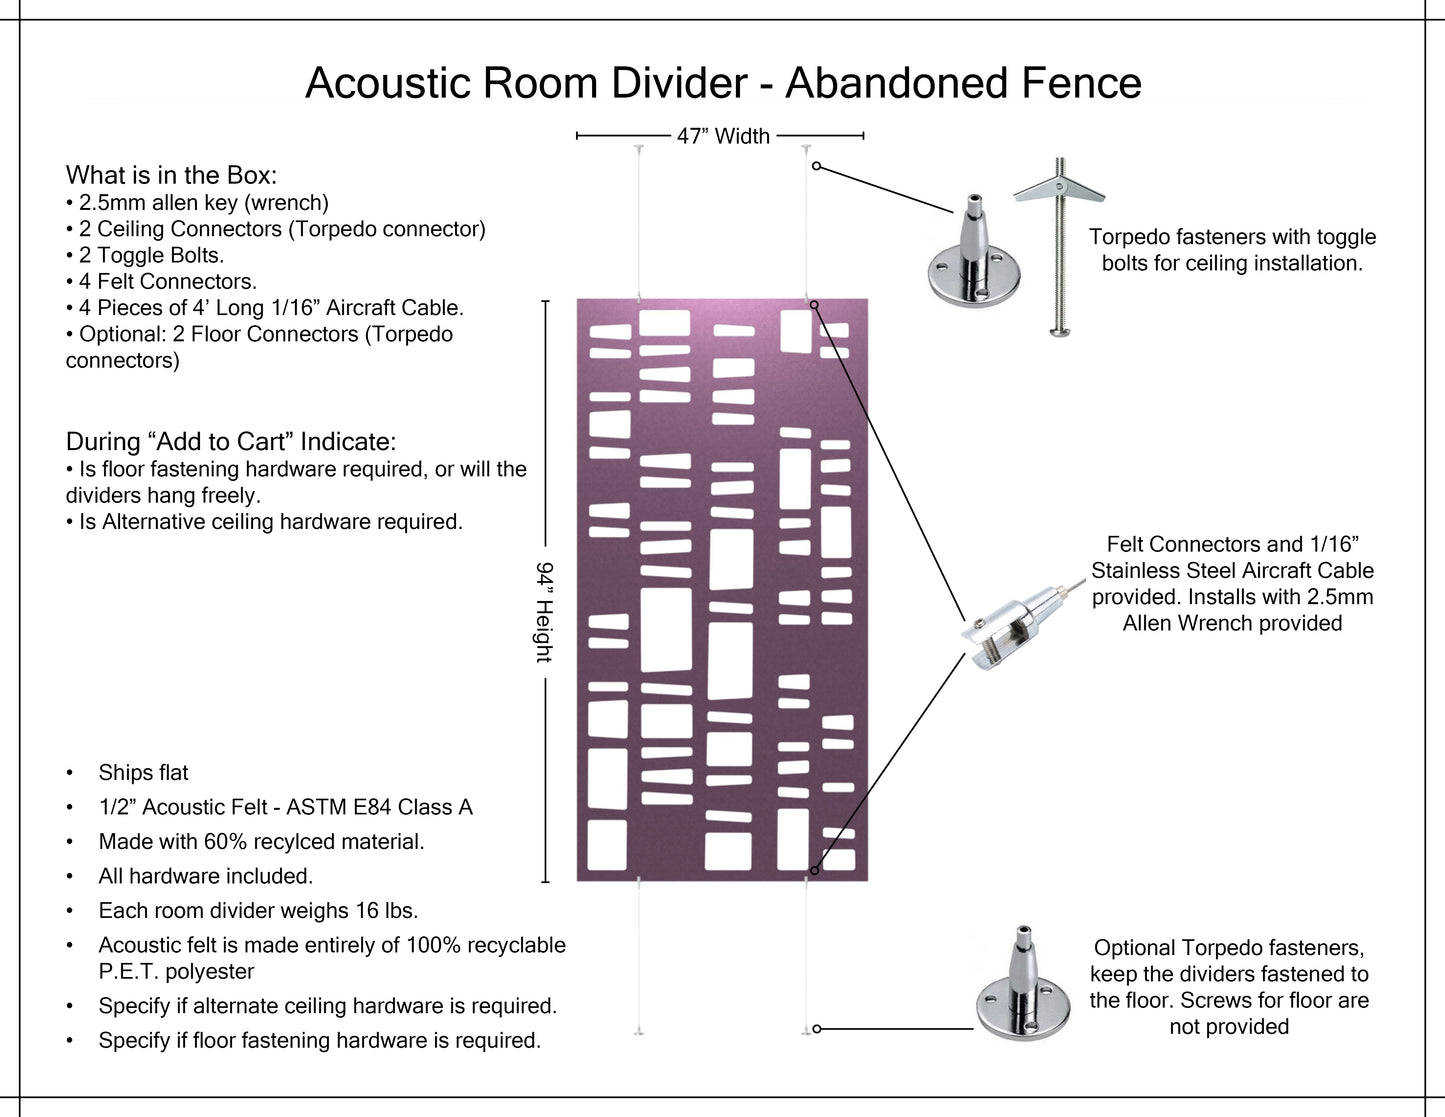 4x8 Acoustic Room Divider - Abandoned Fence